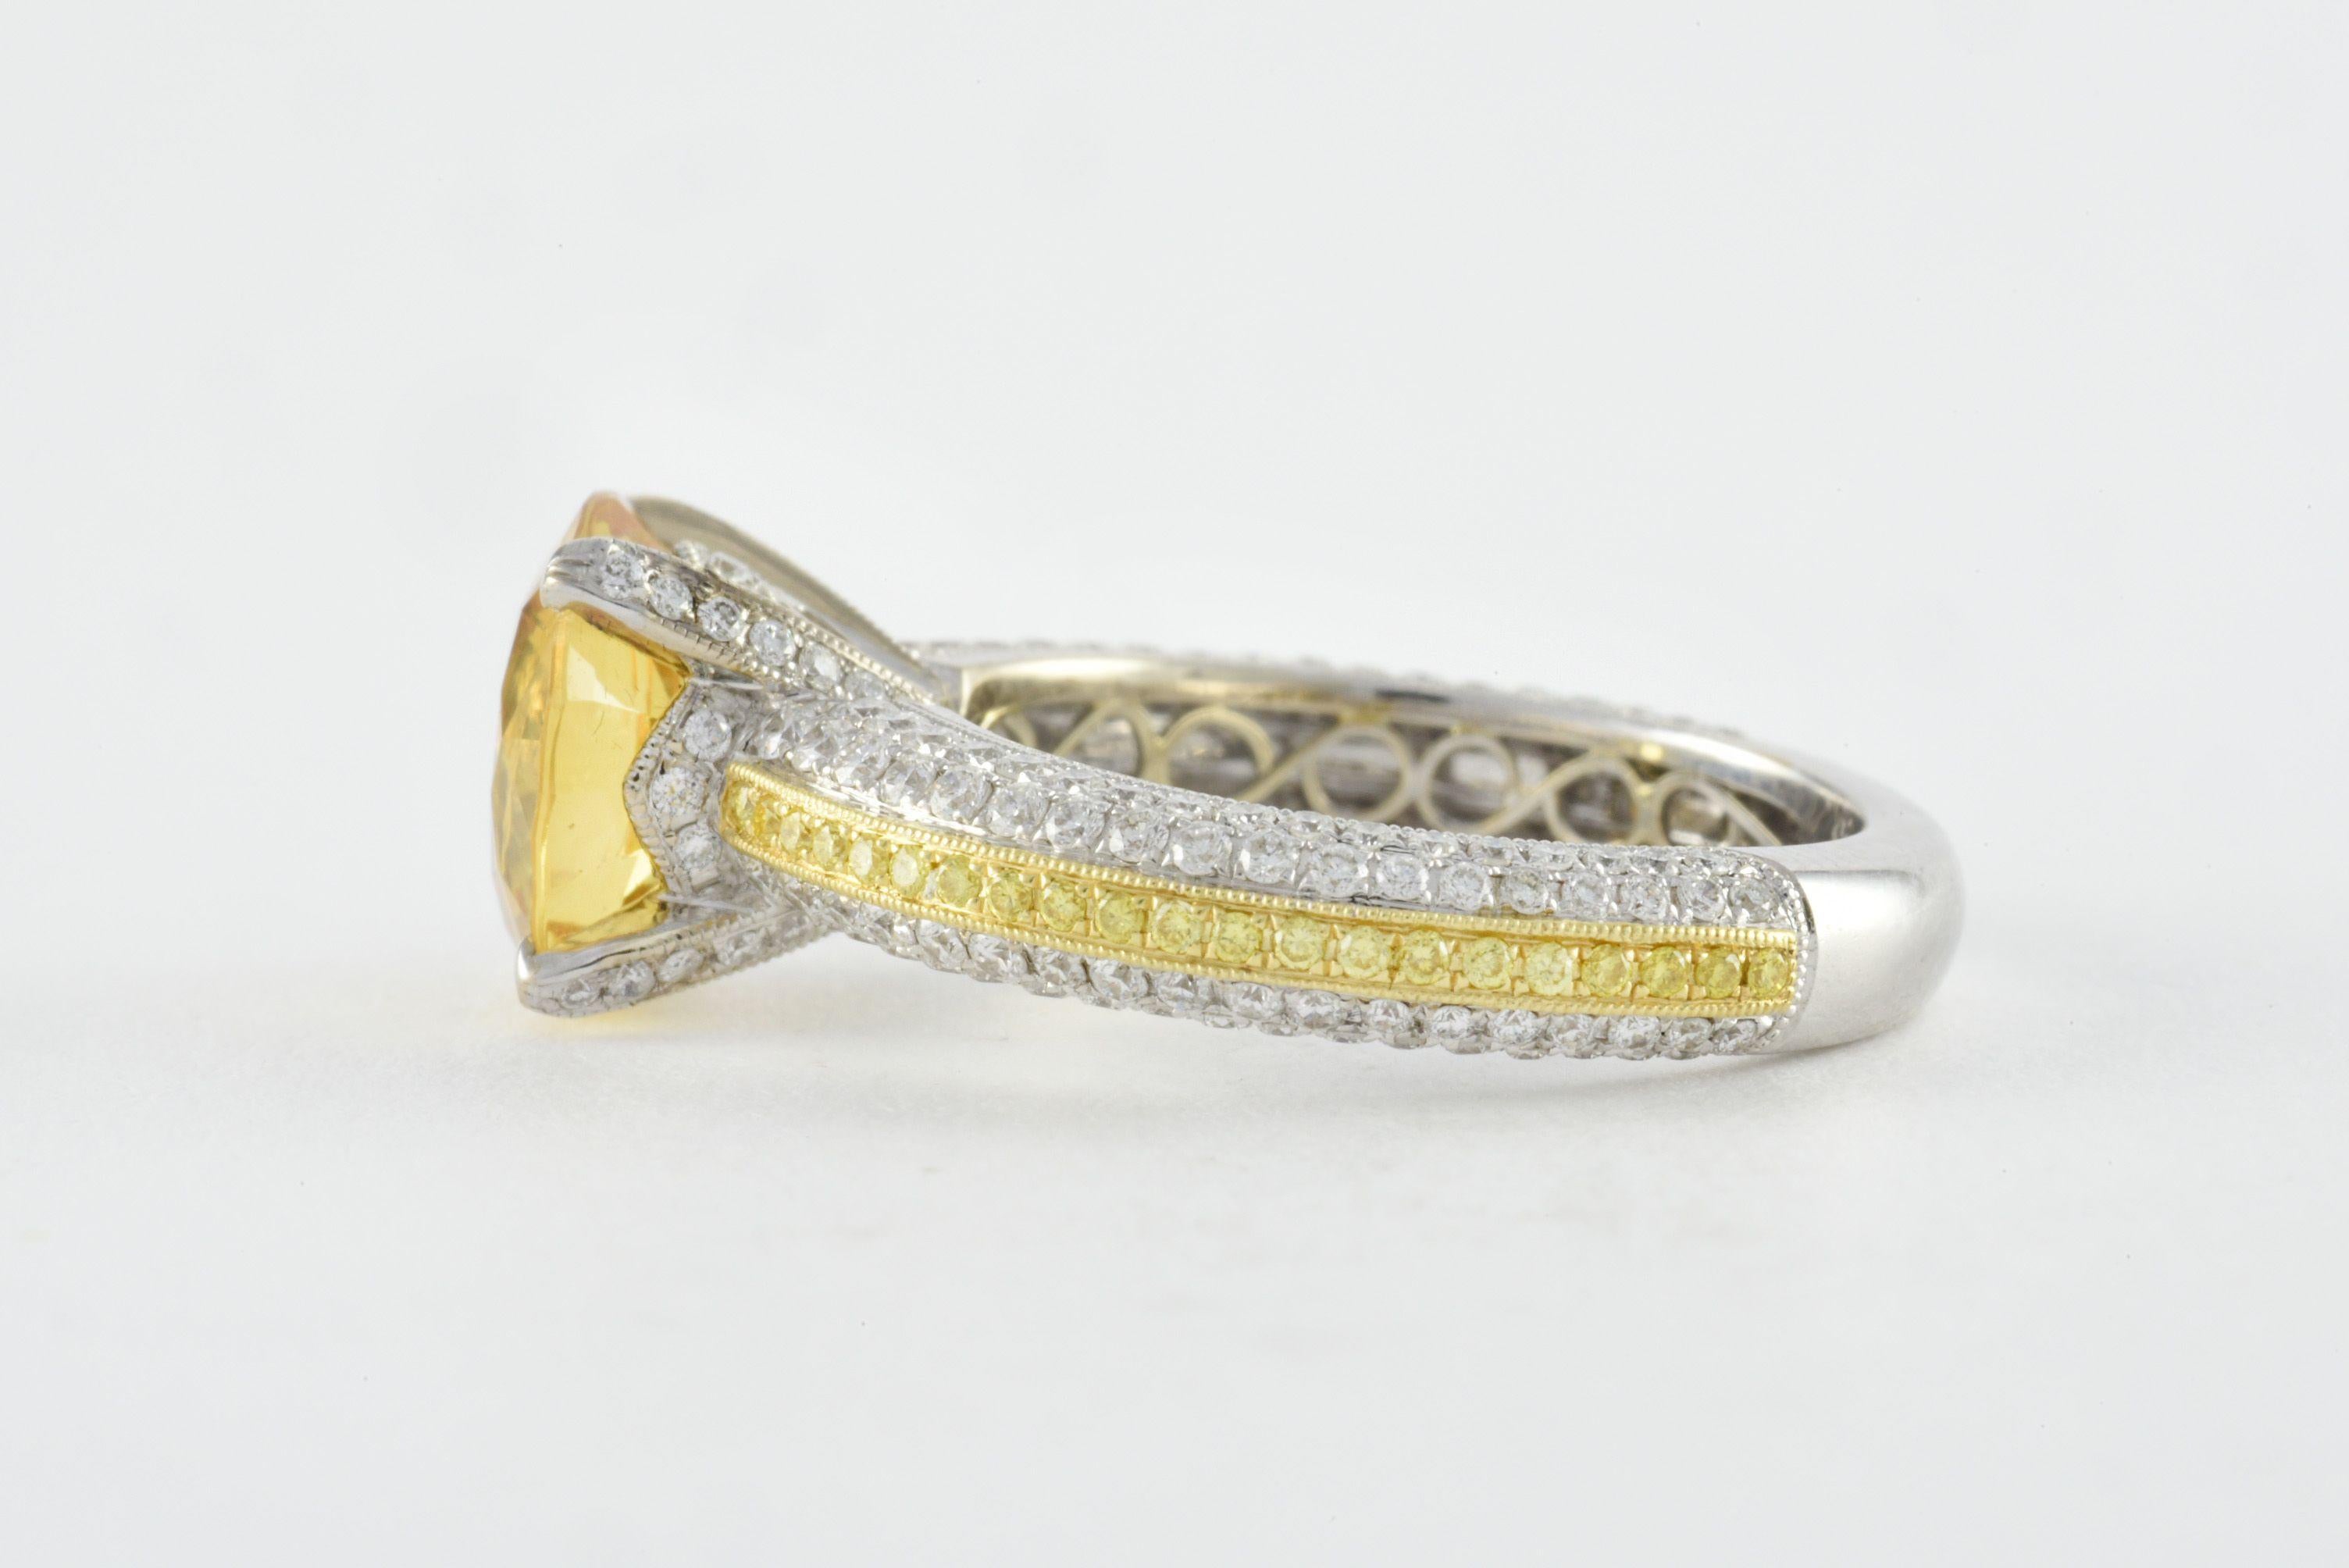 A natural unheated round shaped yellow sapphire measuring approximately 9.61mm sits at the center of this stunning ring by jeweler Simon G. and embellished with a mix of round white diamonds totaling 0.88 carats and fancy yellow diamonds totaling